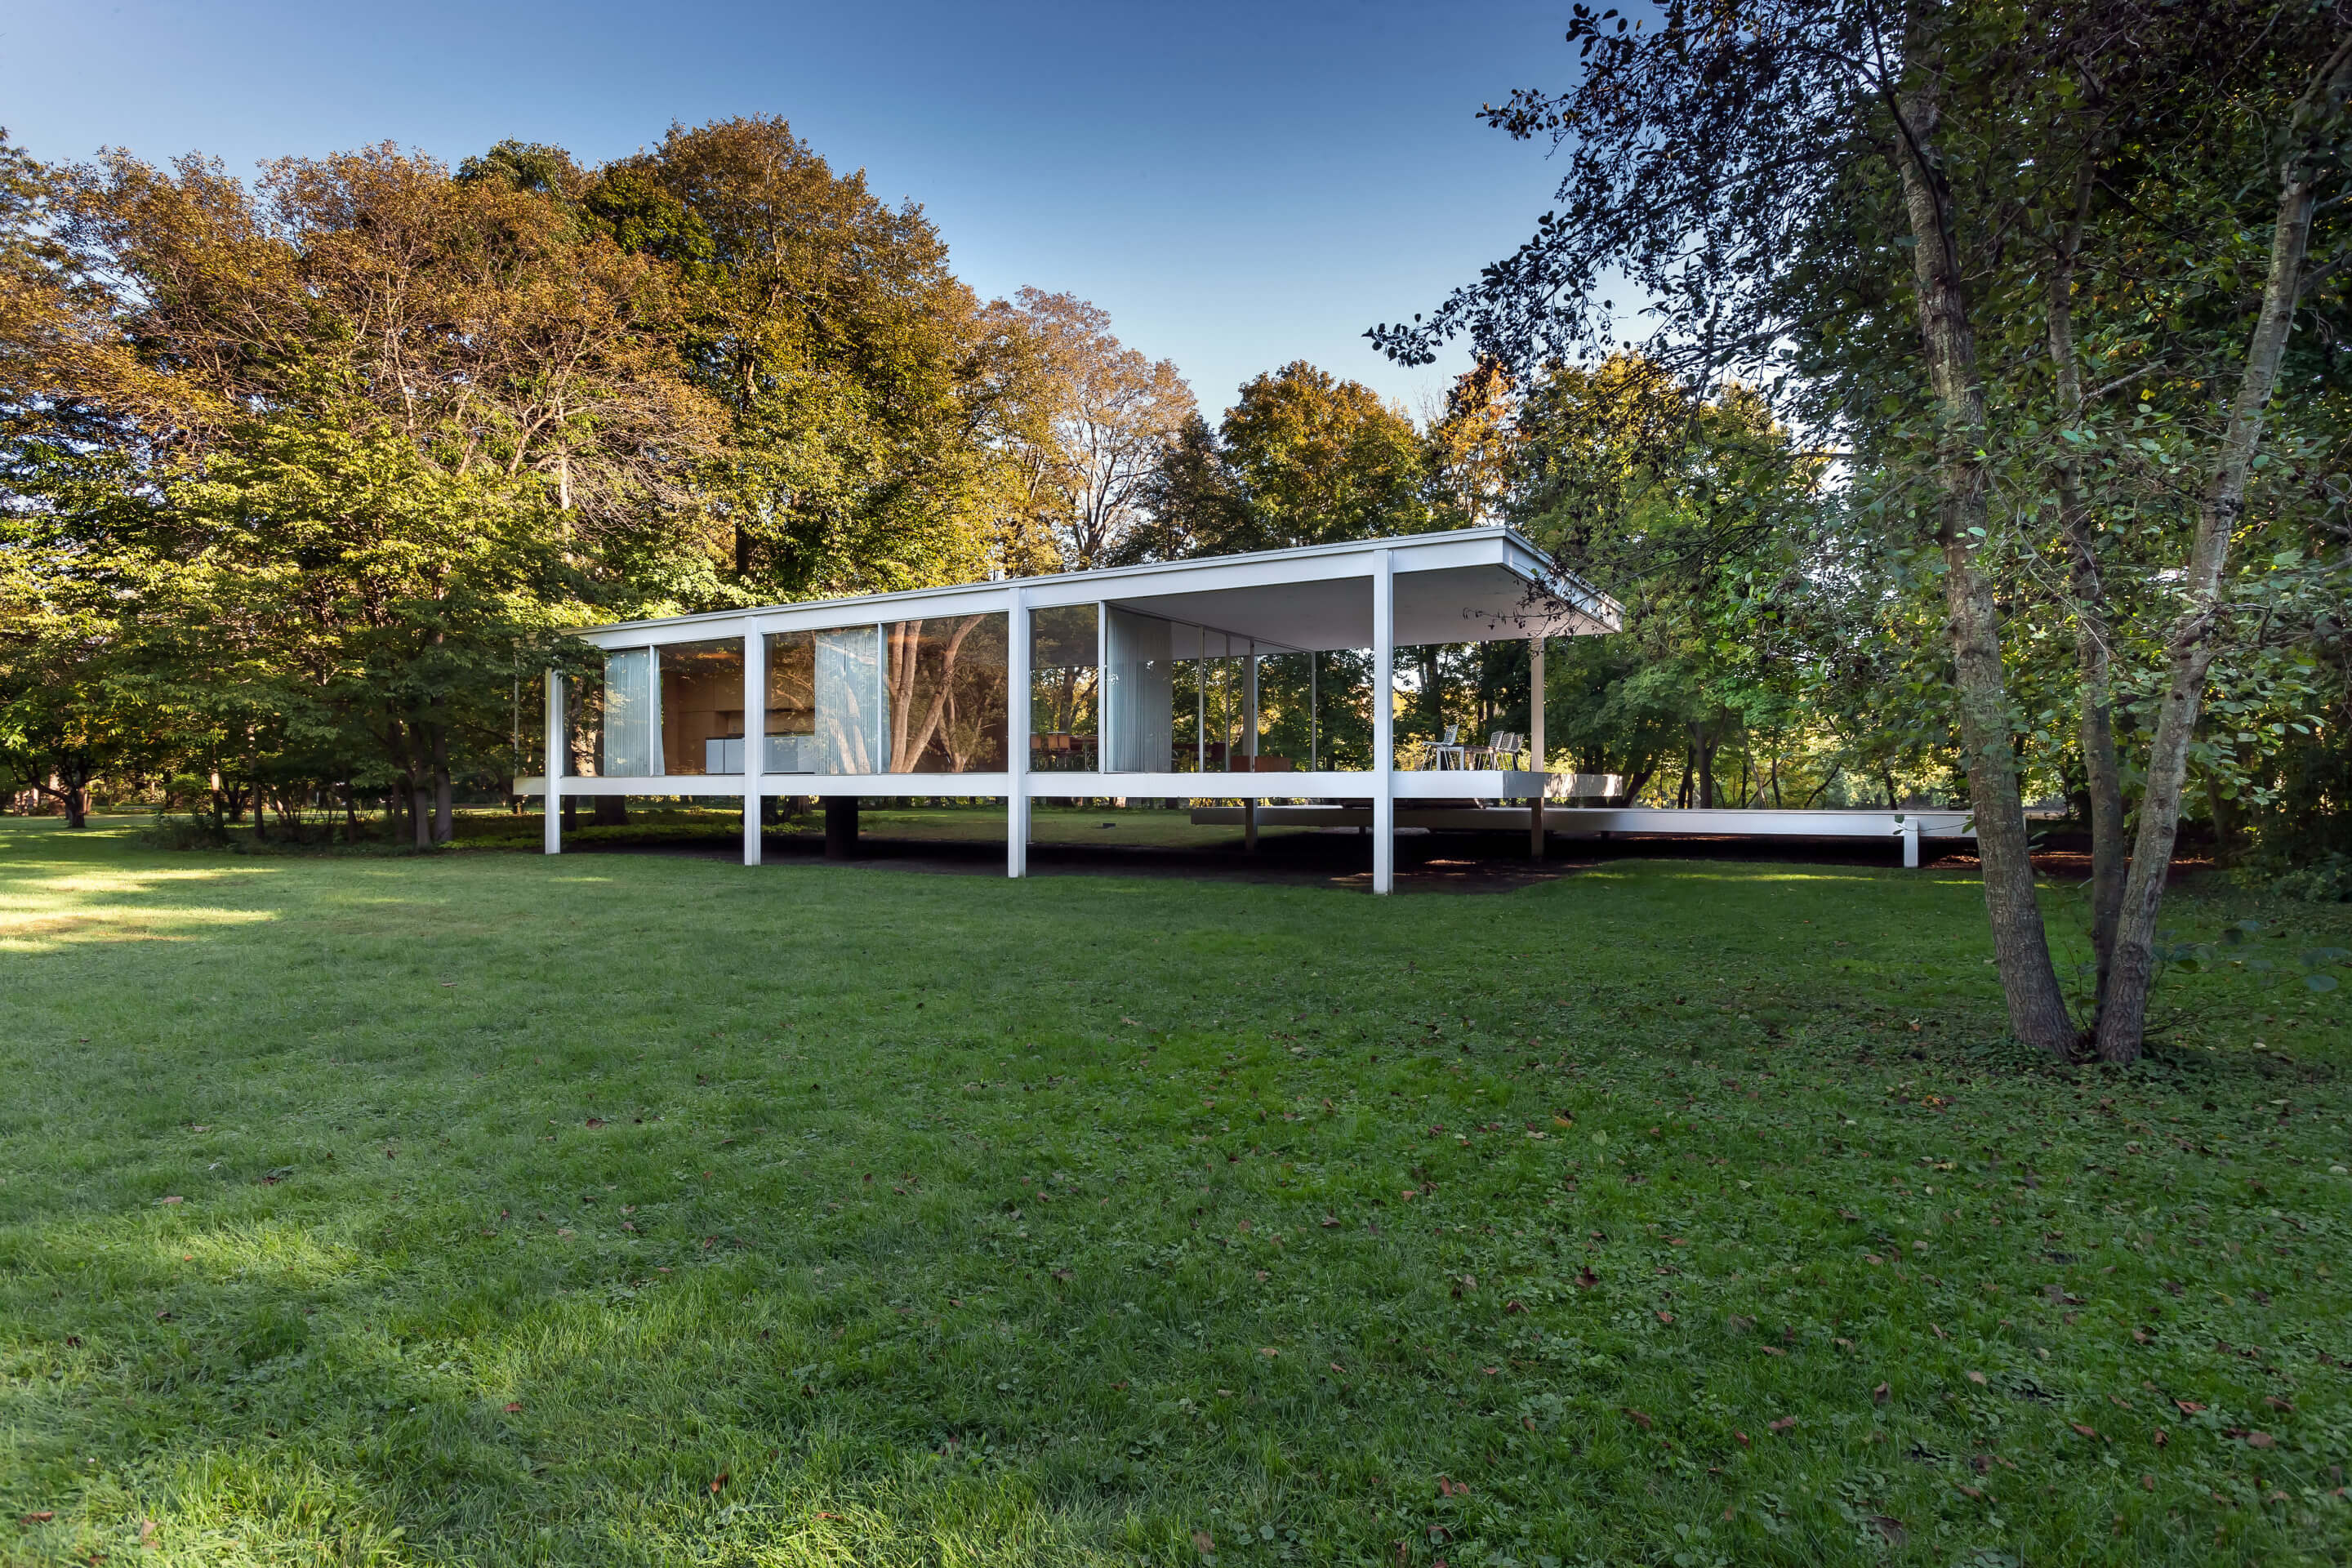 The Farnsworth House is renamed to honor Edith Farnsworth